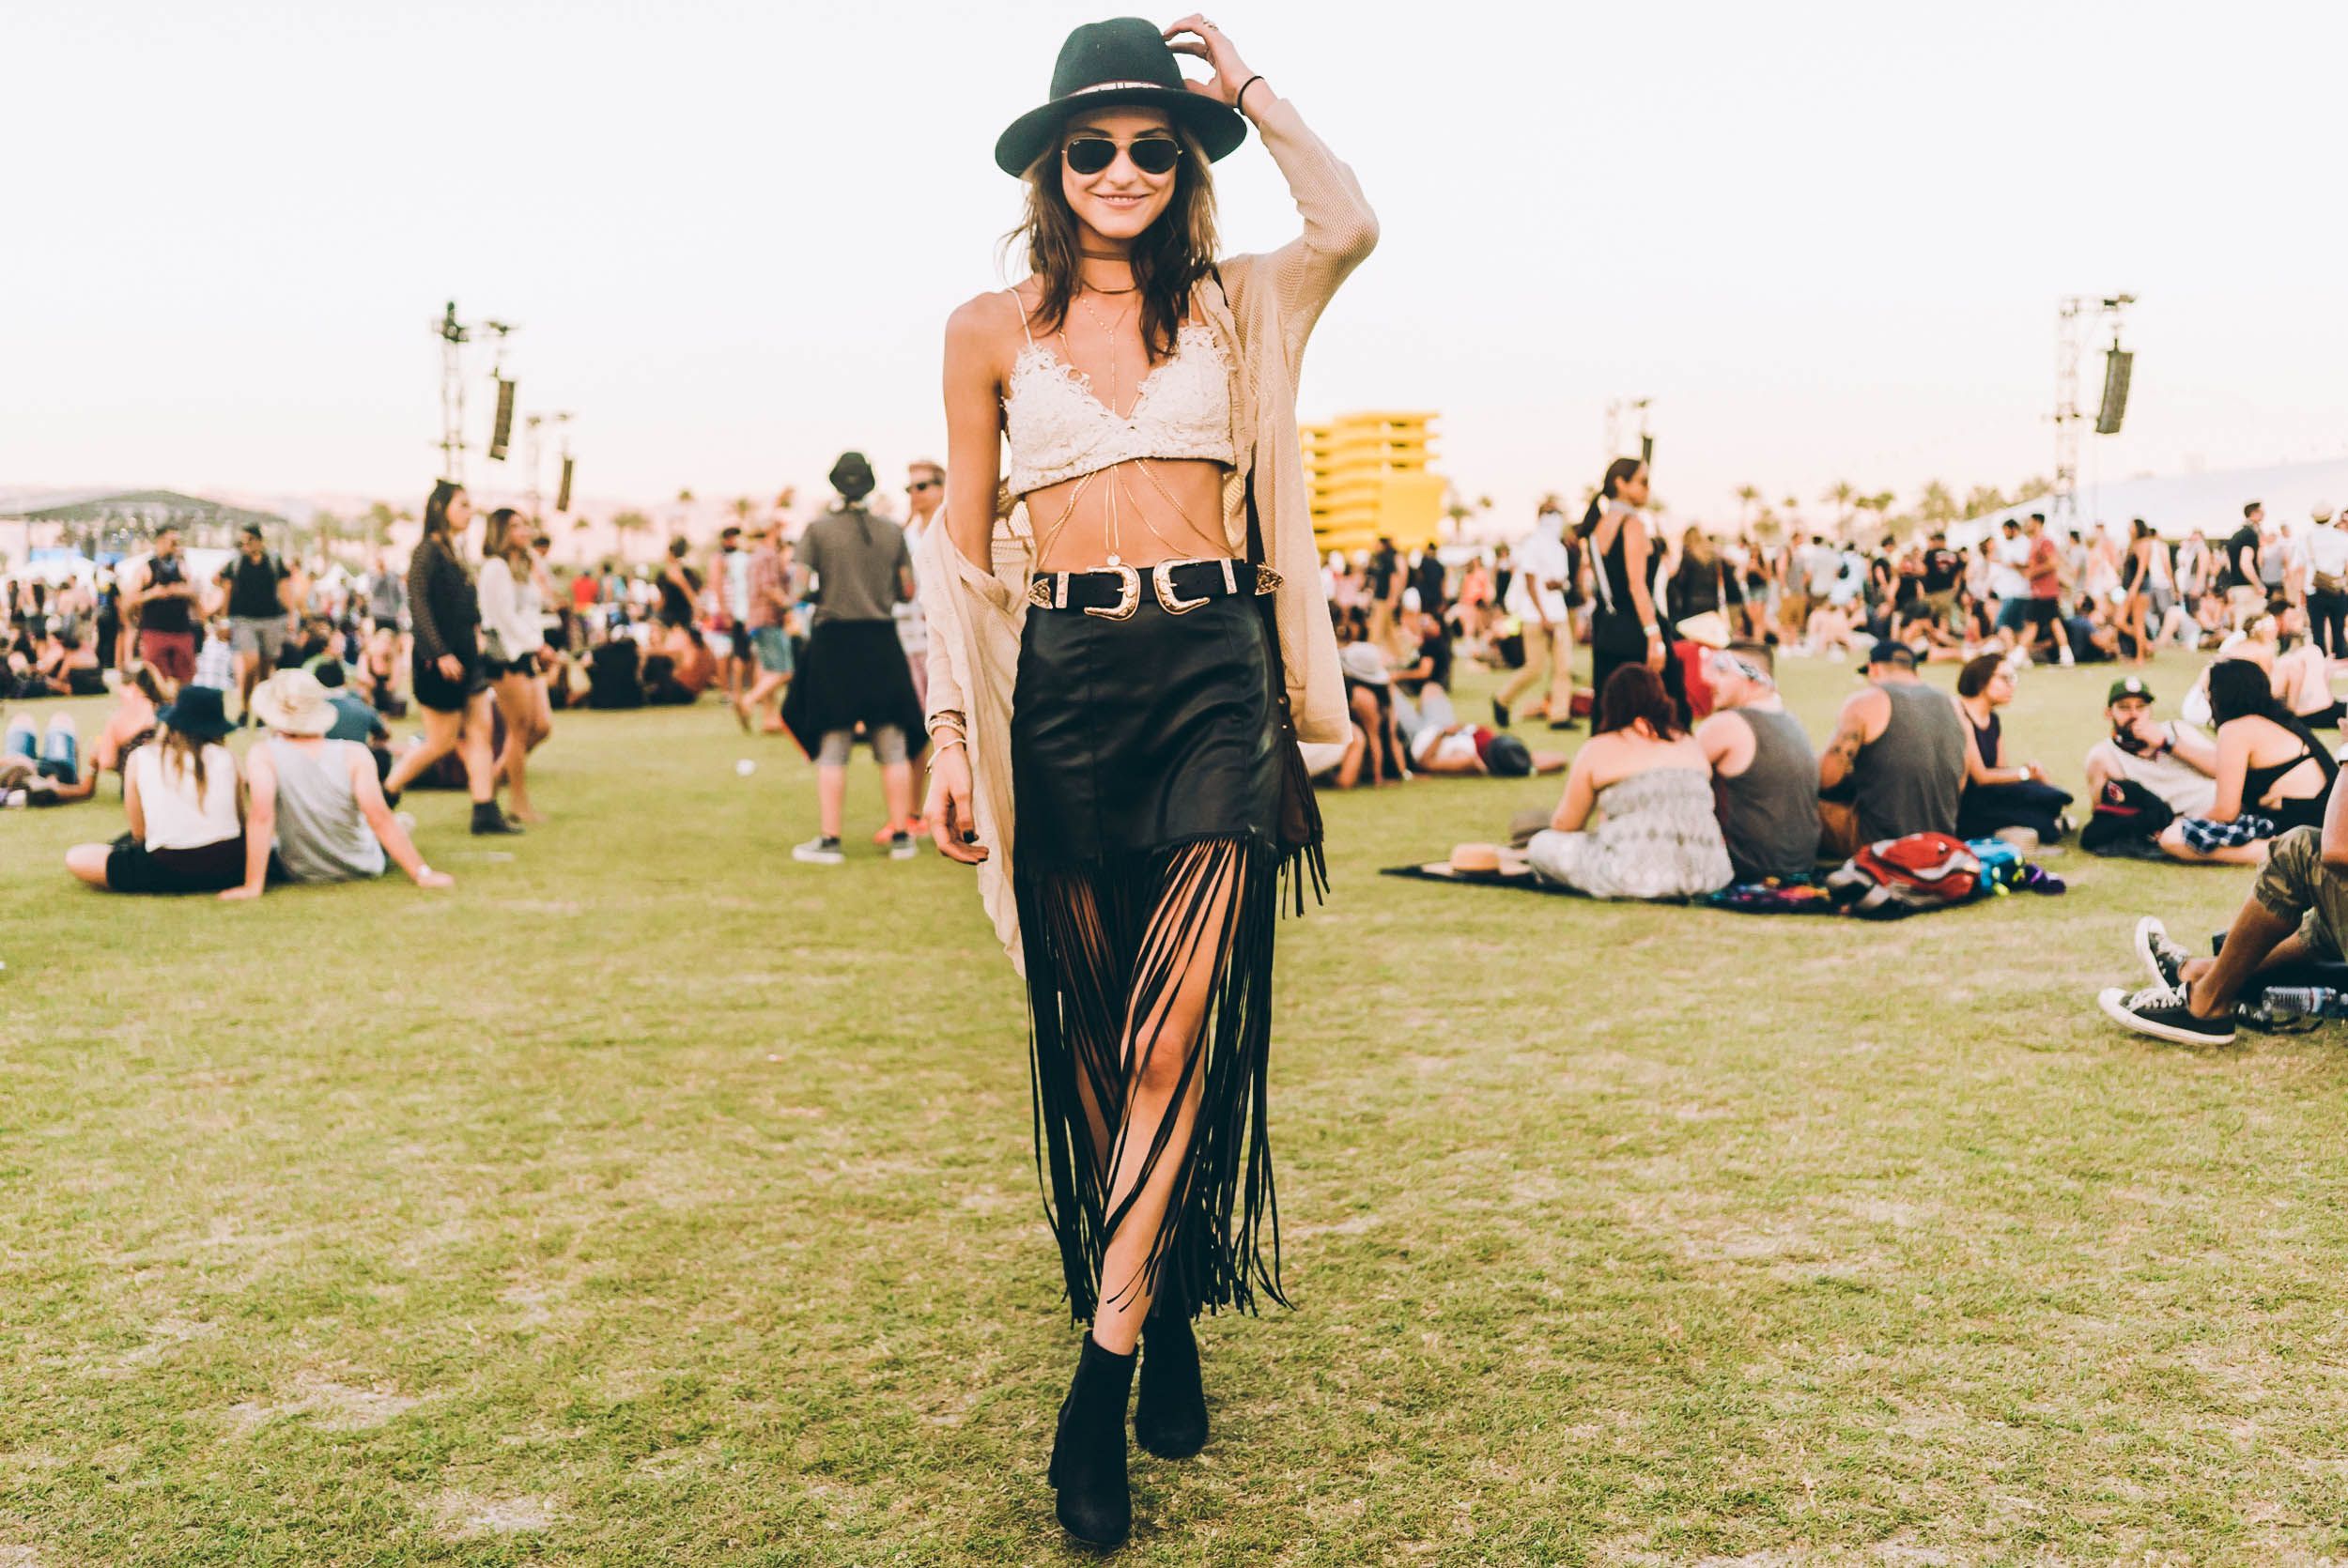 Best Coachella Outfits of 2016 - Street Style and Festival Fashion From  Coachella Music Festival